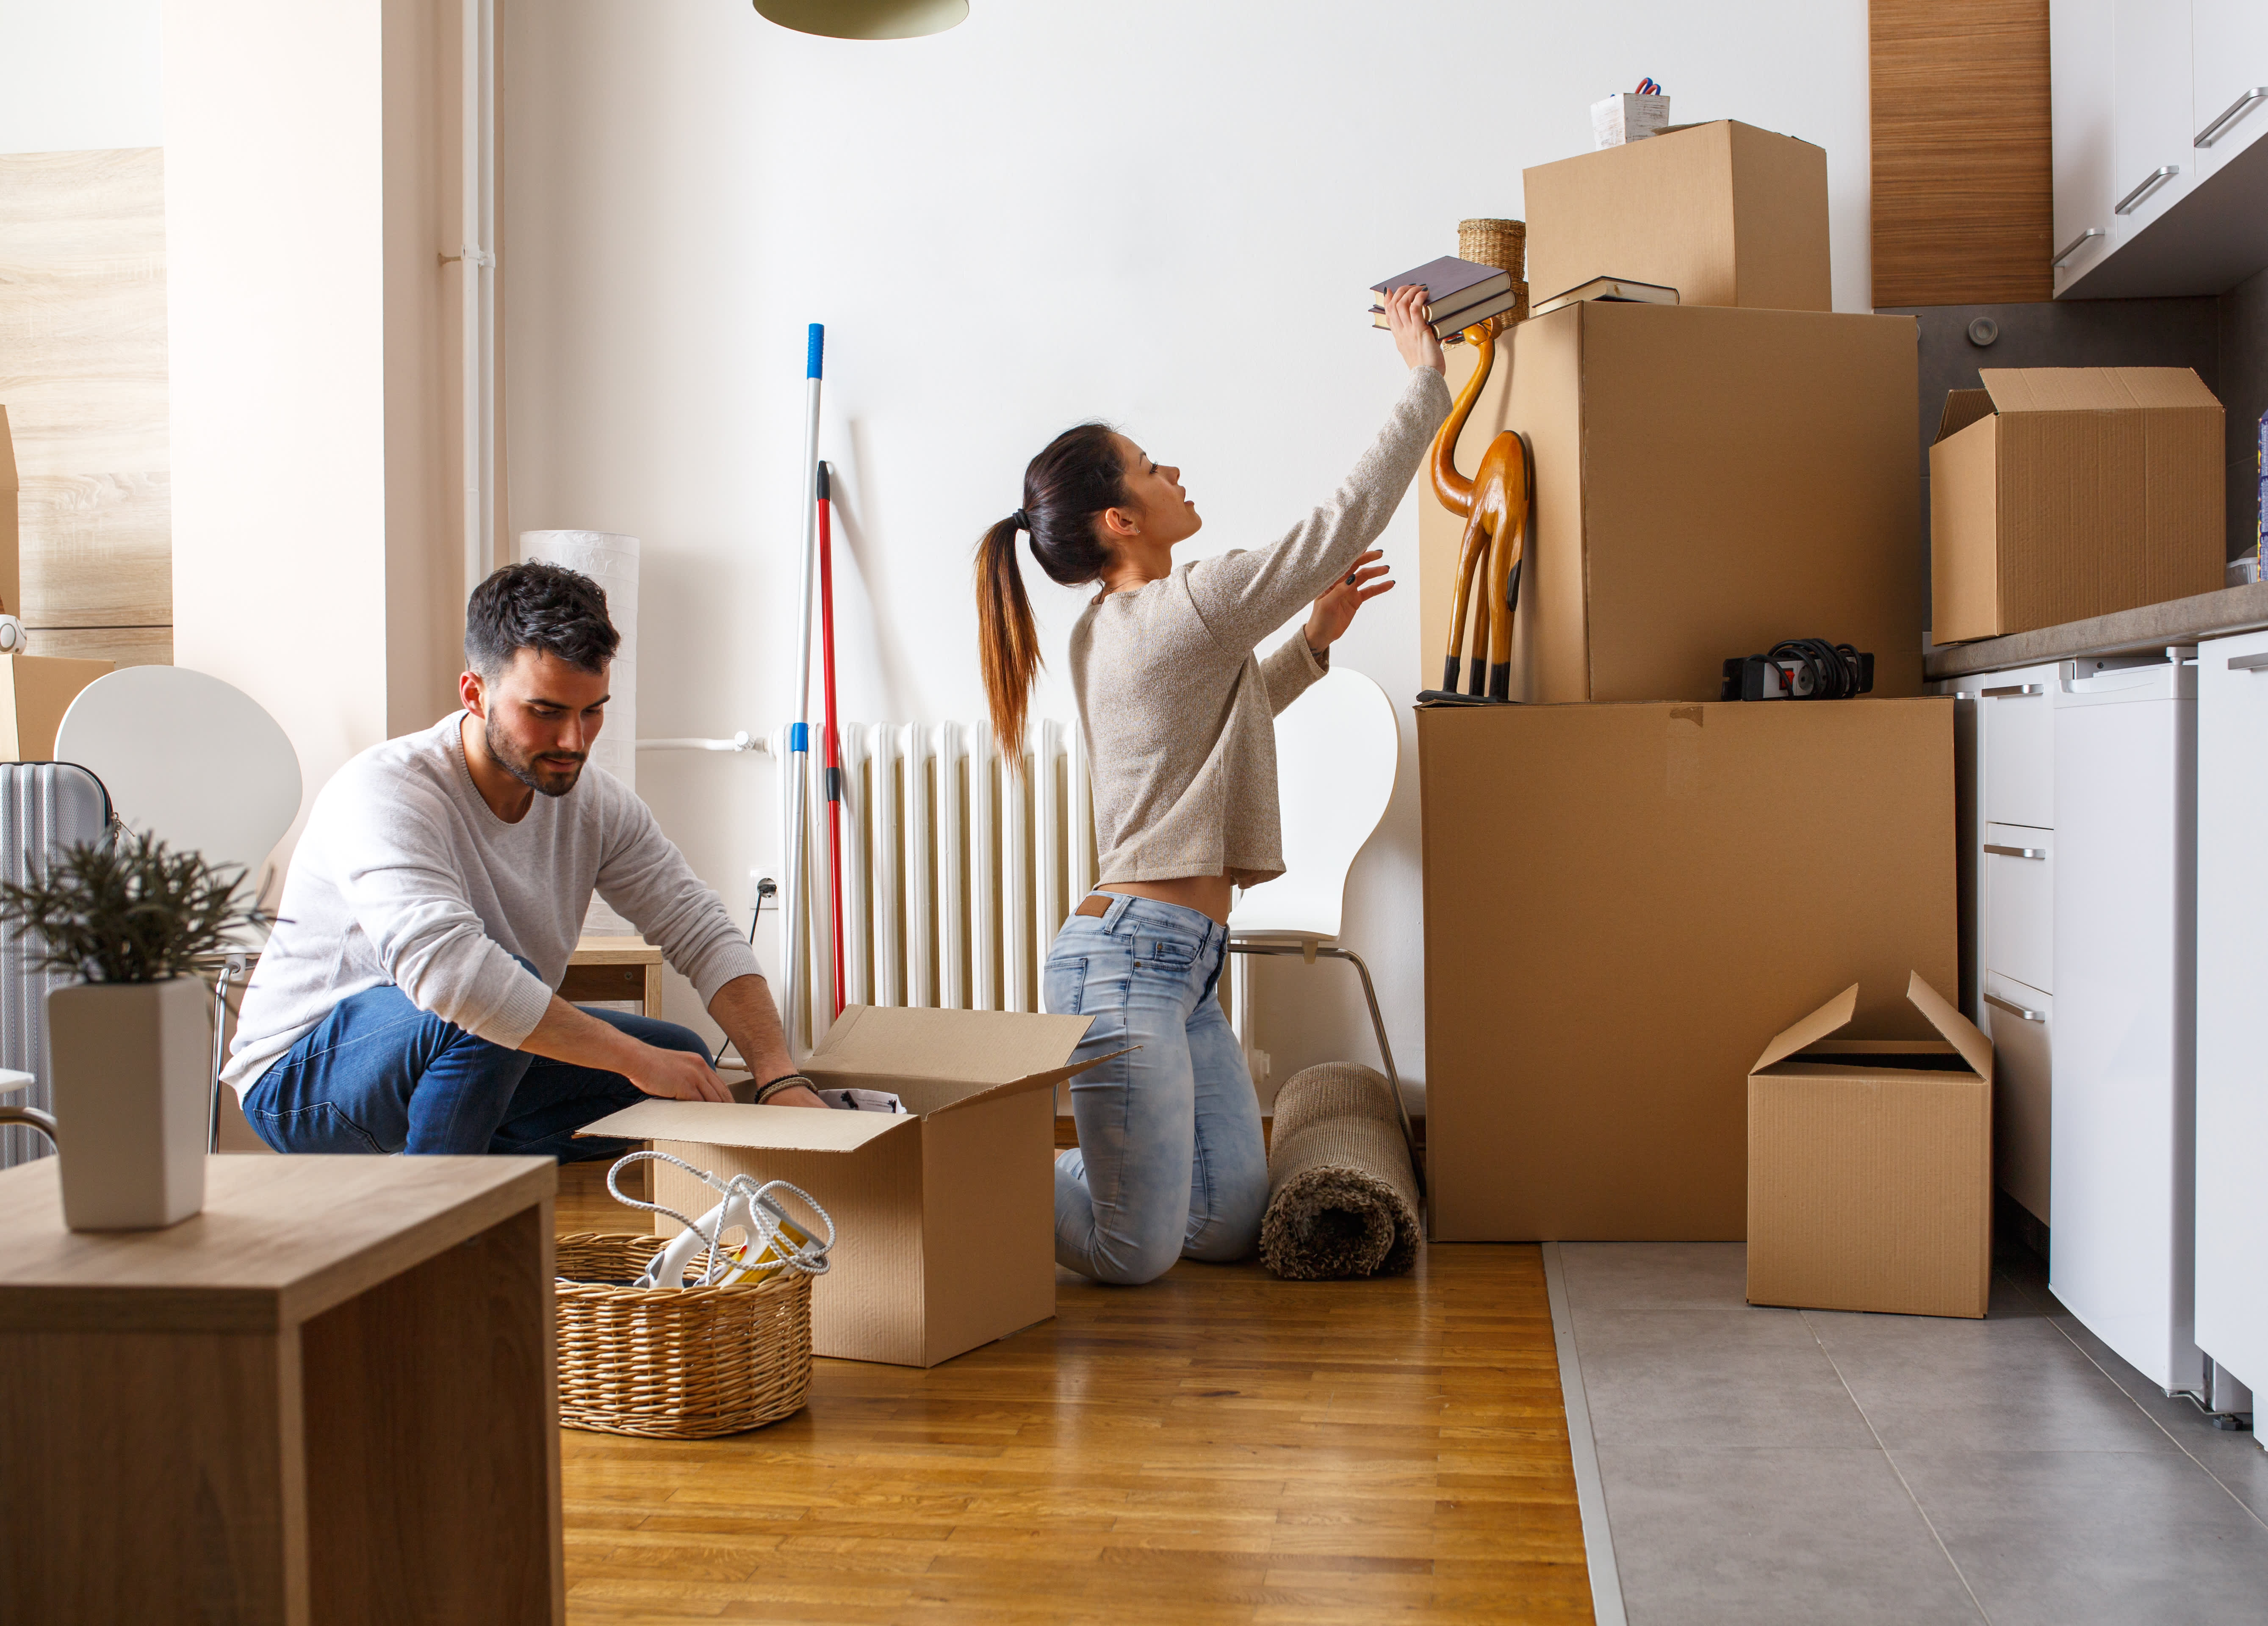 What to Do With Boxes After Moving: 20 Great Options - MyMovingReviews